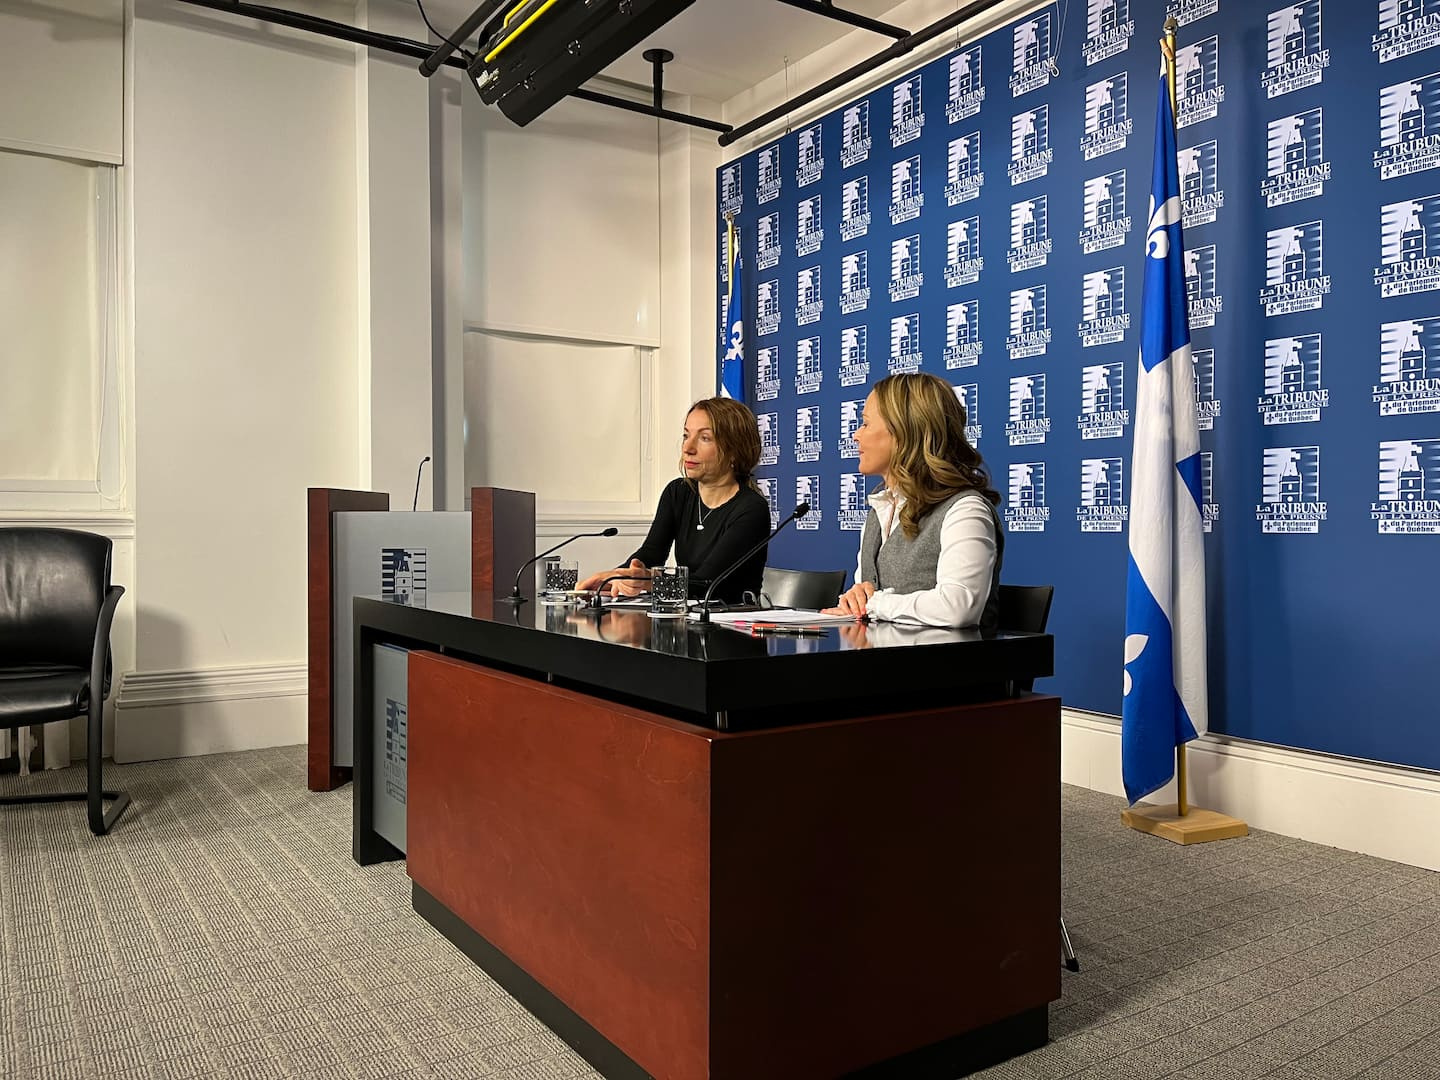 Quebec tramway: Martine Ouellet joins the opponents of the project